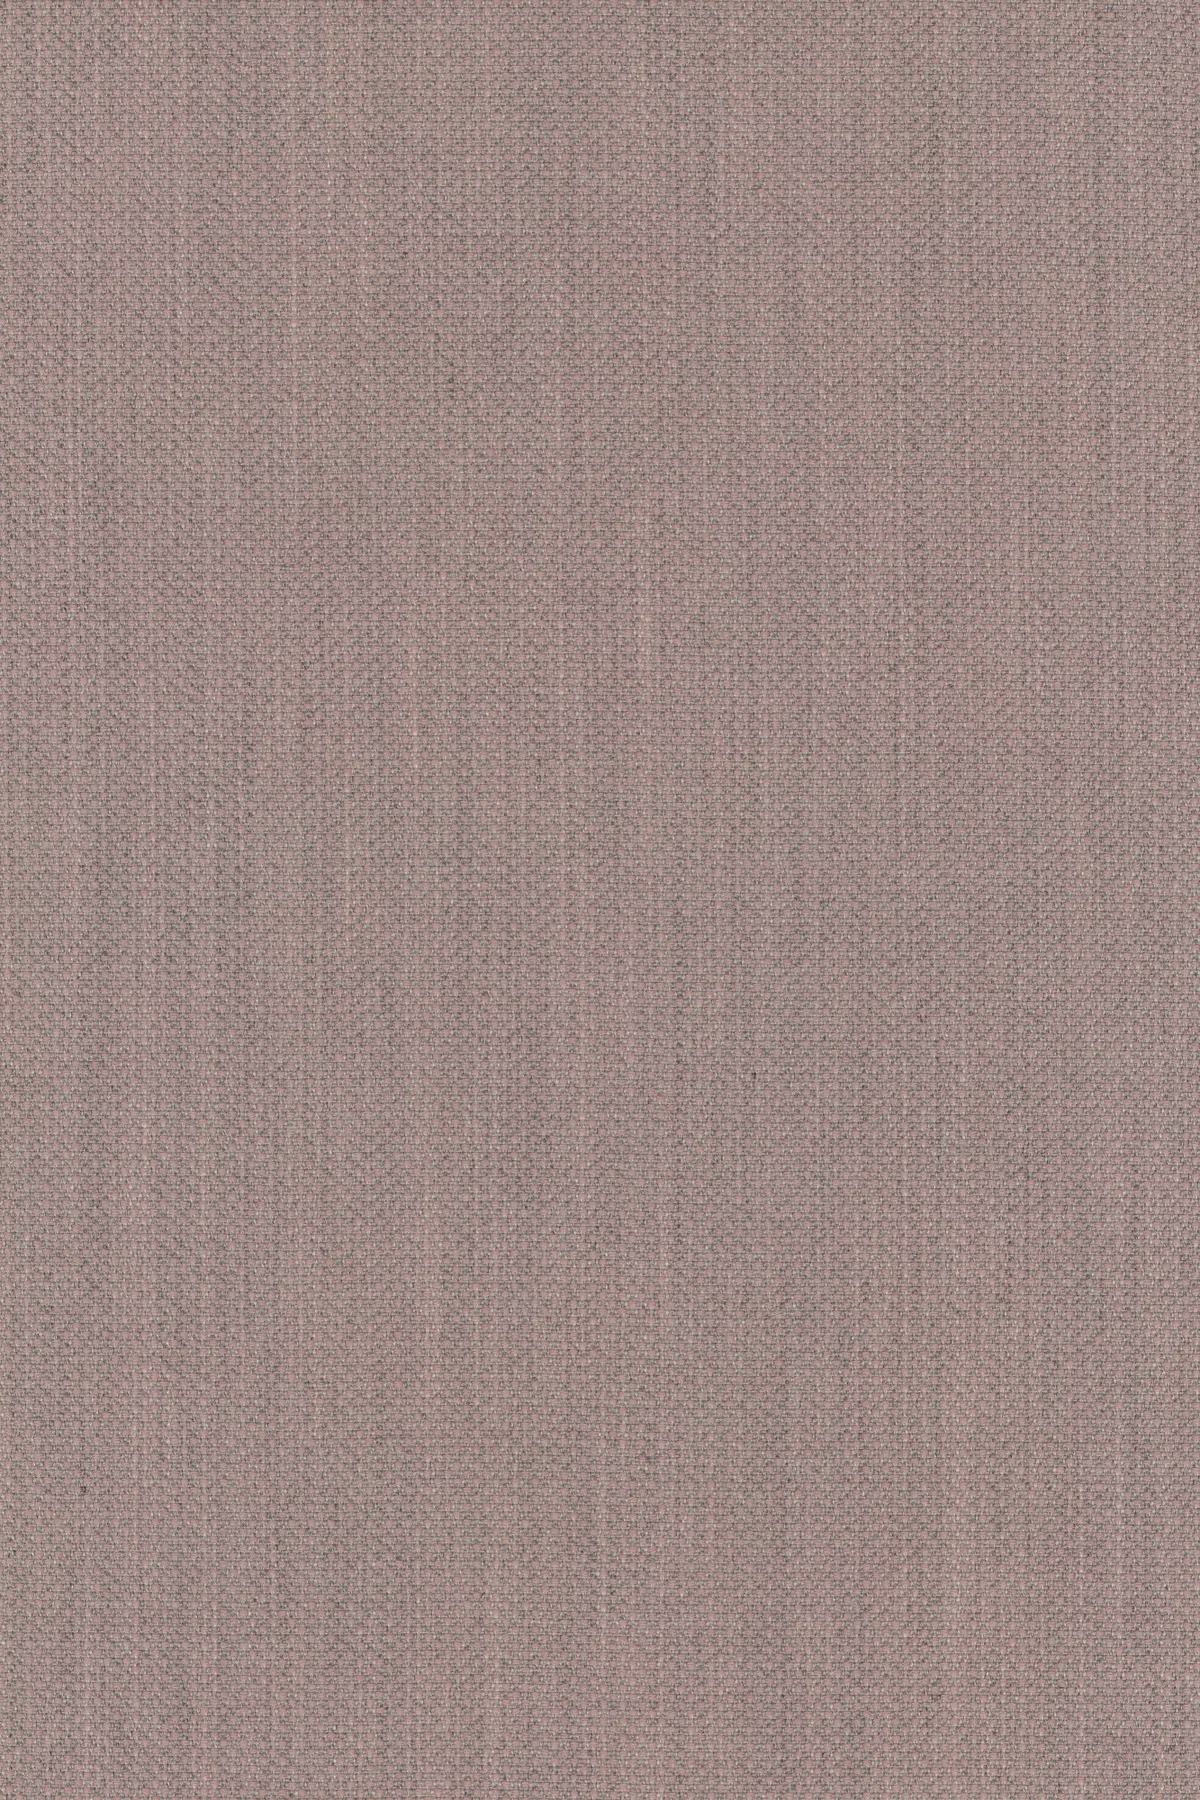 Fabric sample Fiord 521 pink